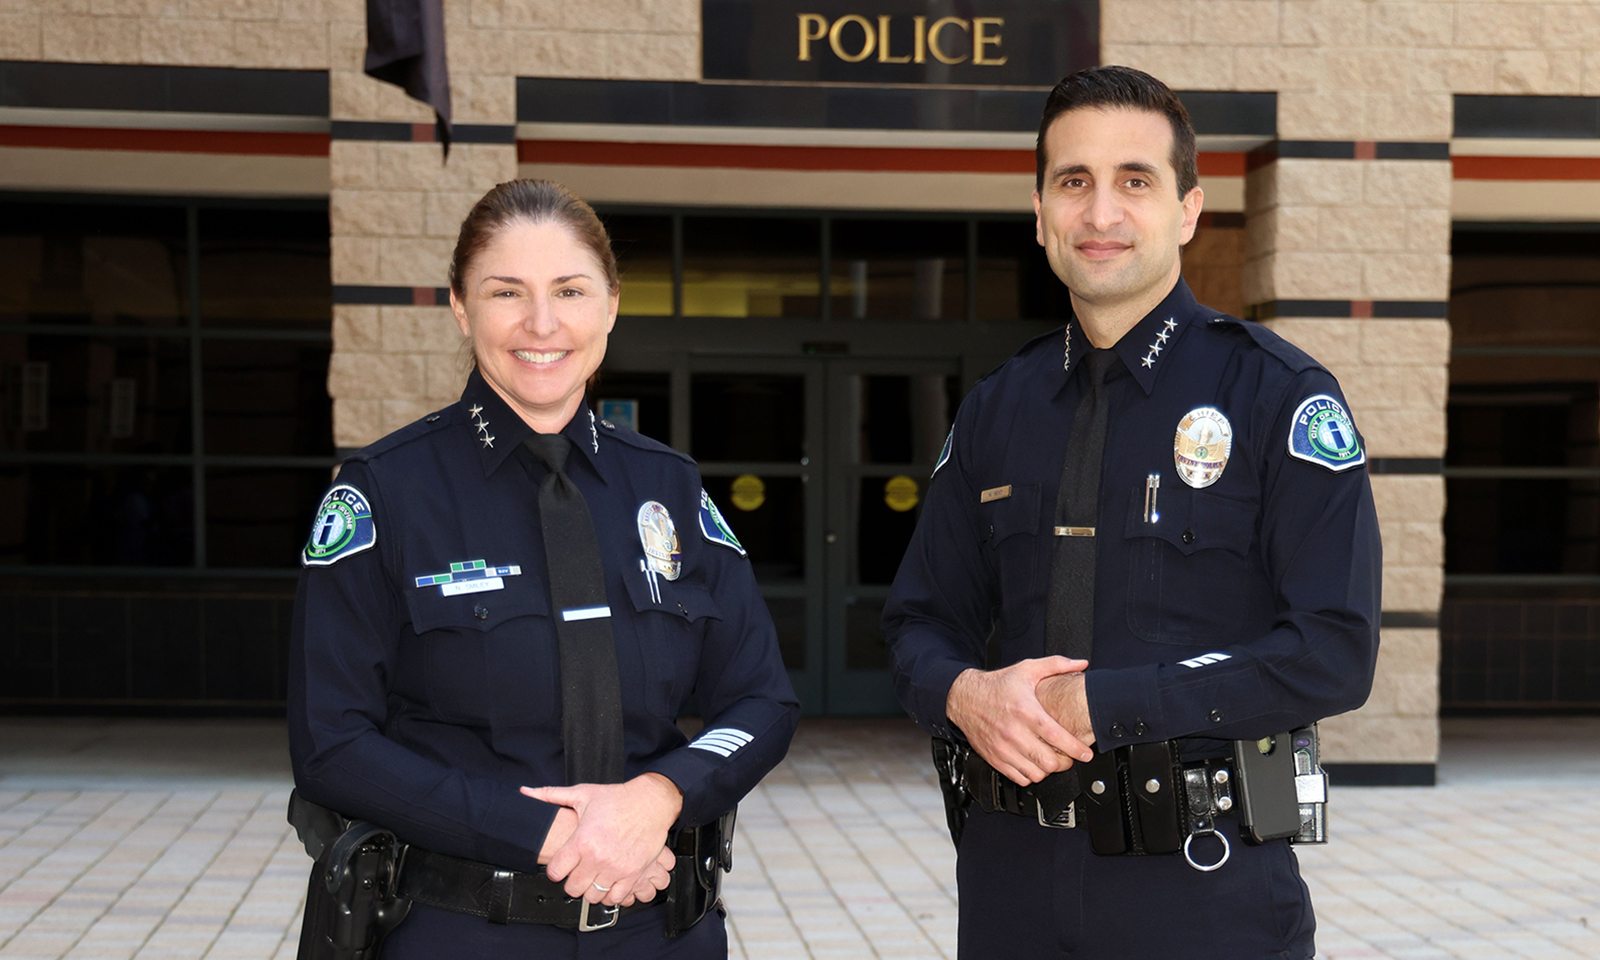 Officer promoted to assistant chief